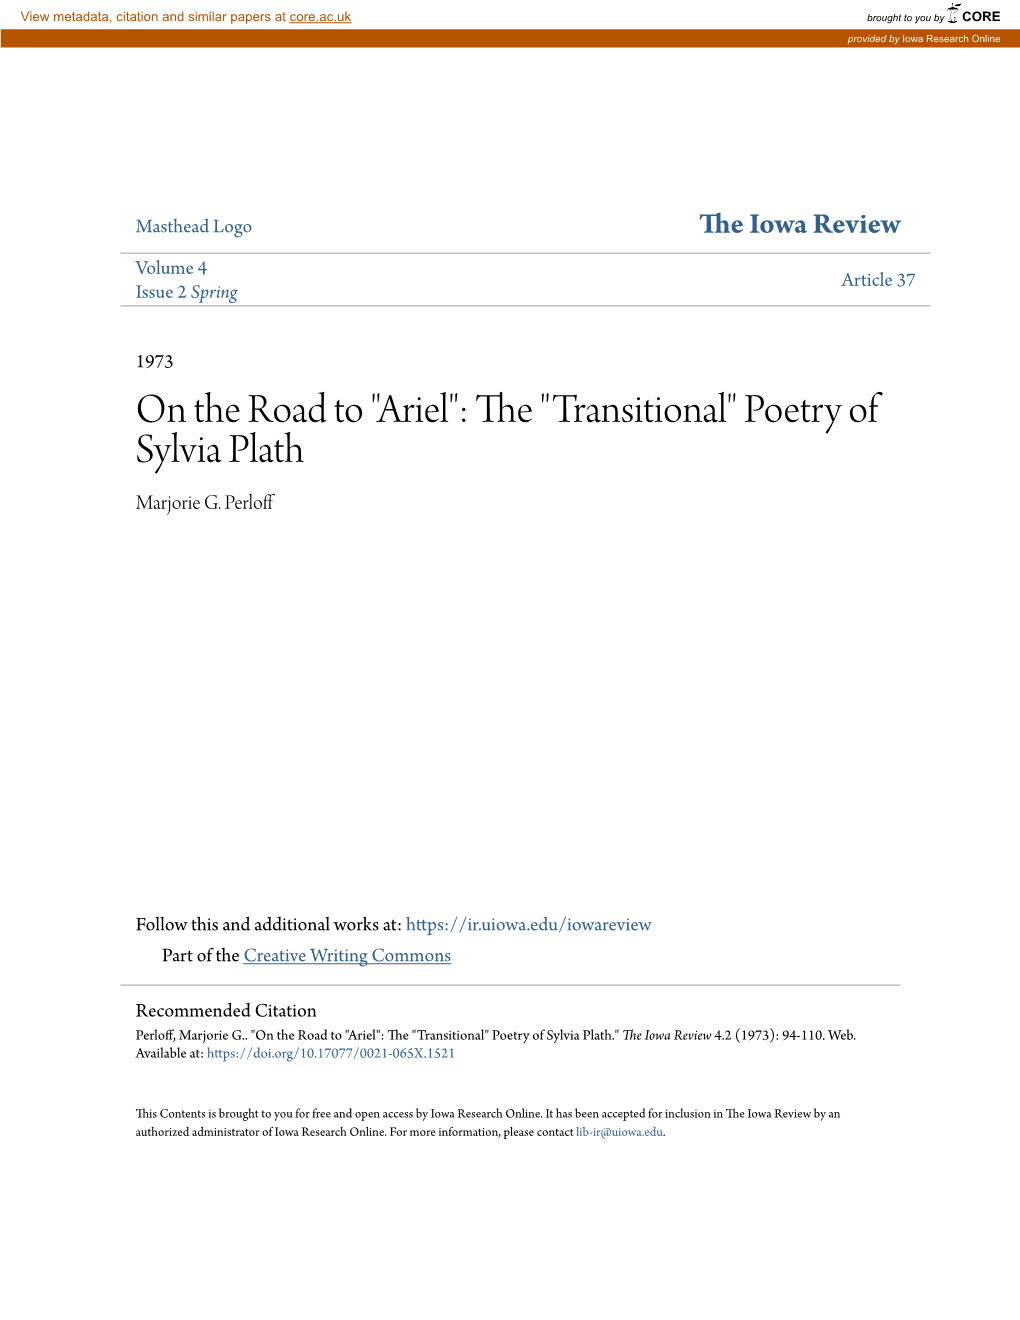 On the Road to "Ariel": the "Transitional" Poetry of Sylvia Plath Marjorie G